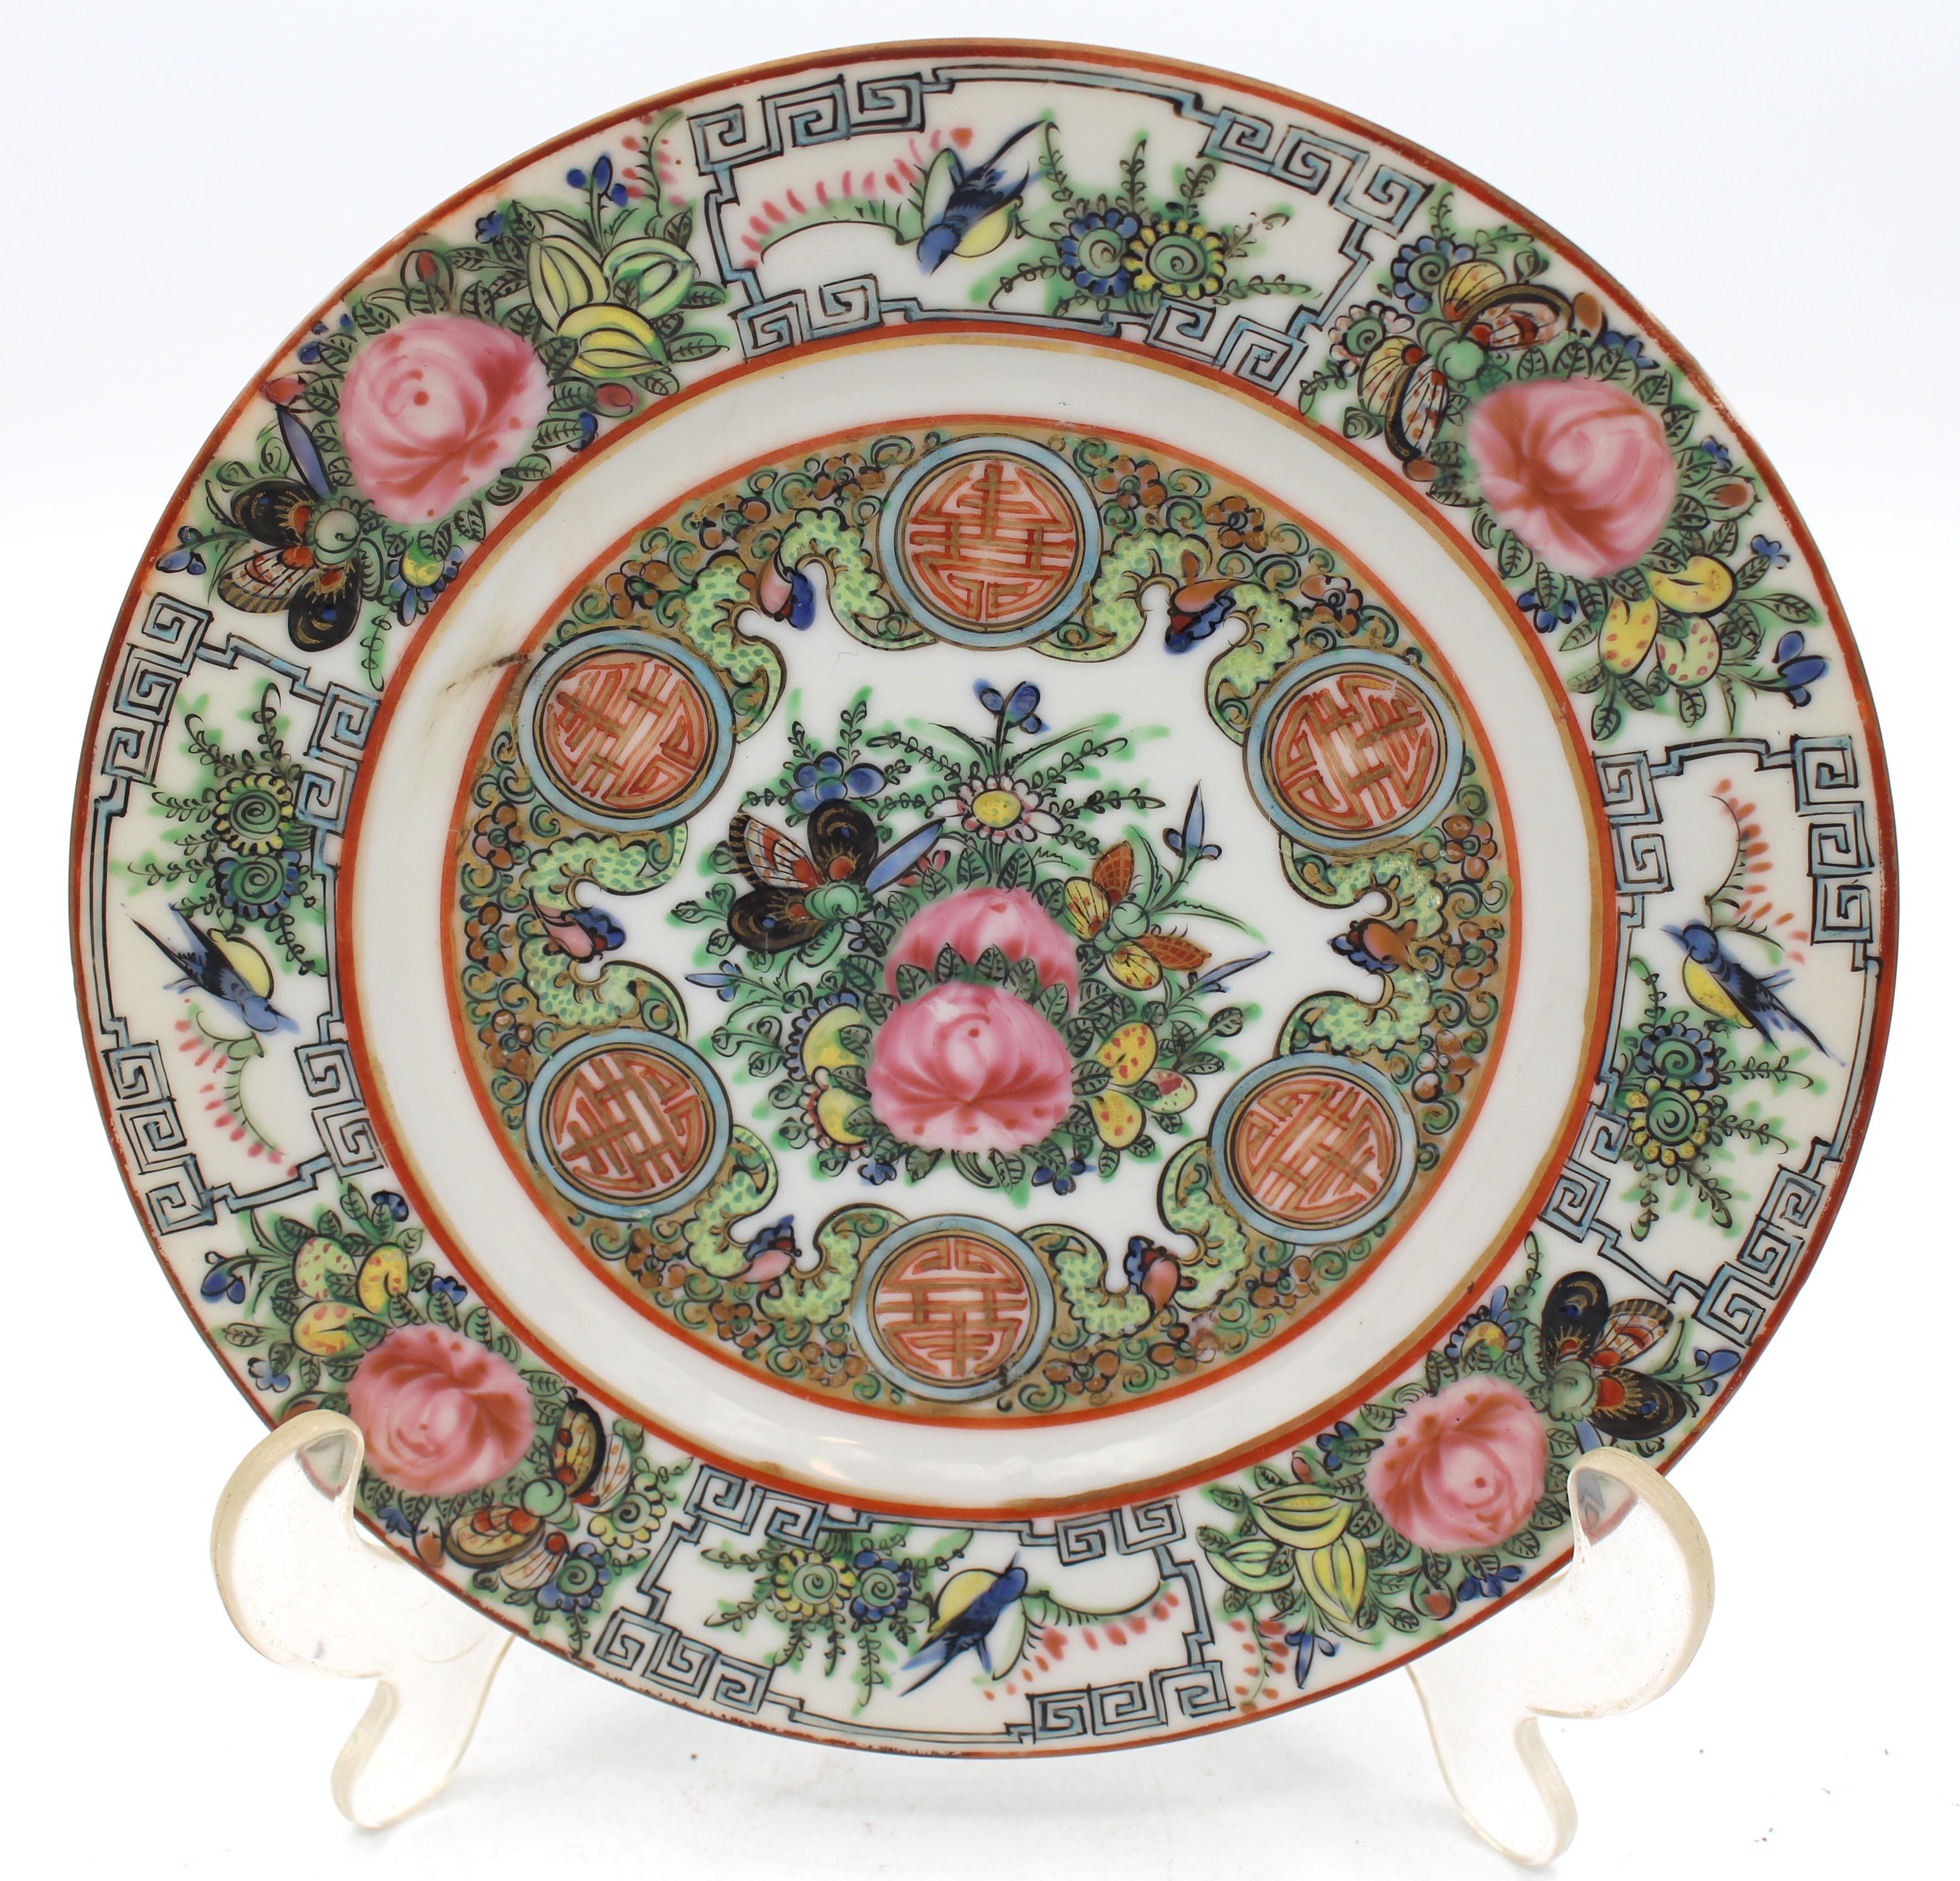 Circa 1920 Chinese Export Set of 10 Rose Canton Salad Plates. Double happiness symbols; birds & butterfly reserved border panel & central medallion. Marked 